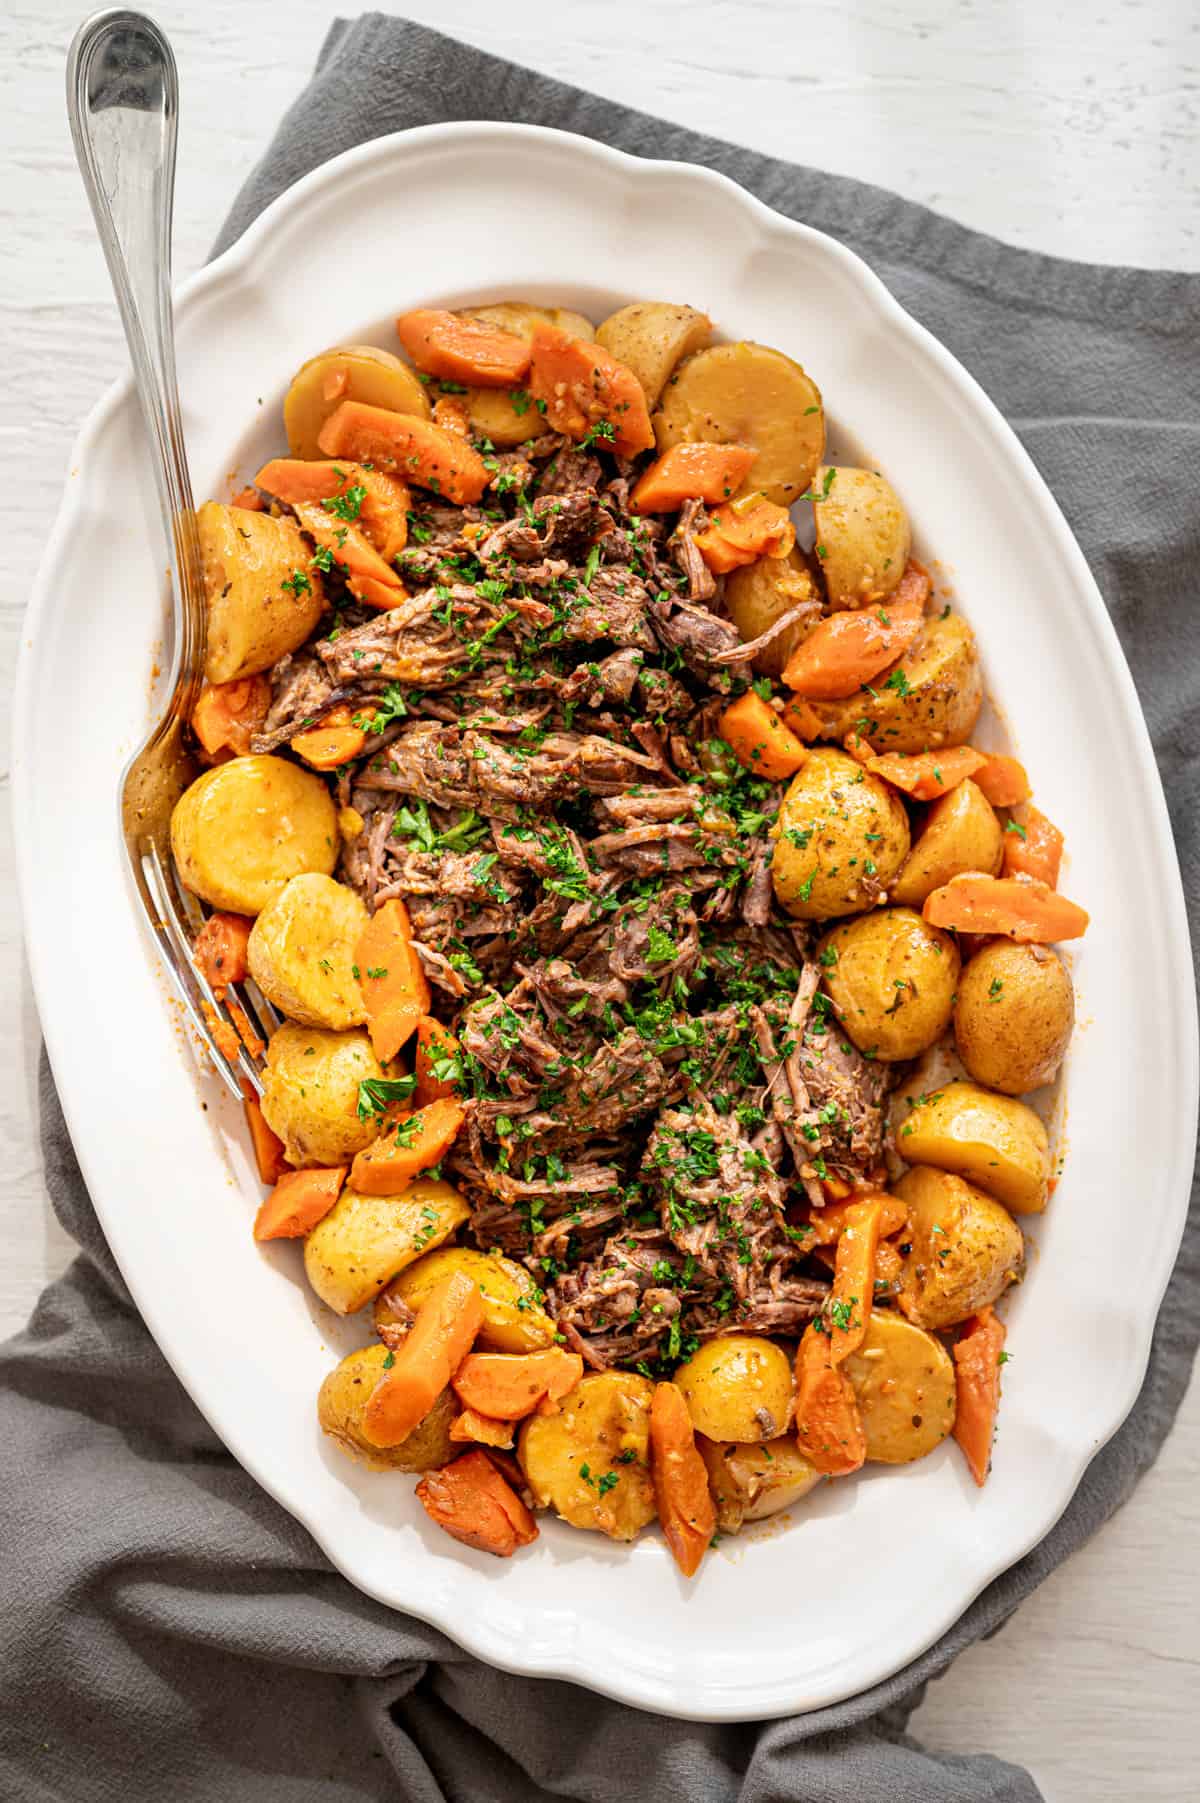 Pot roast on a platter in the middle of Yukon gold potatoes and carrots.